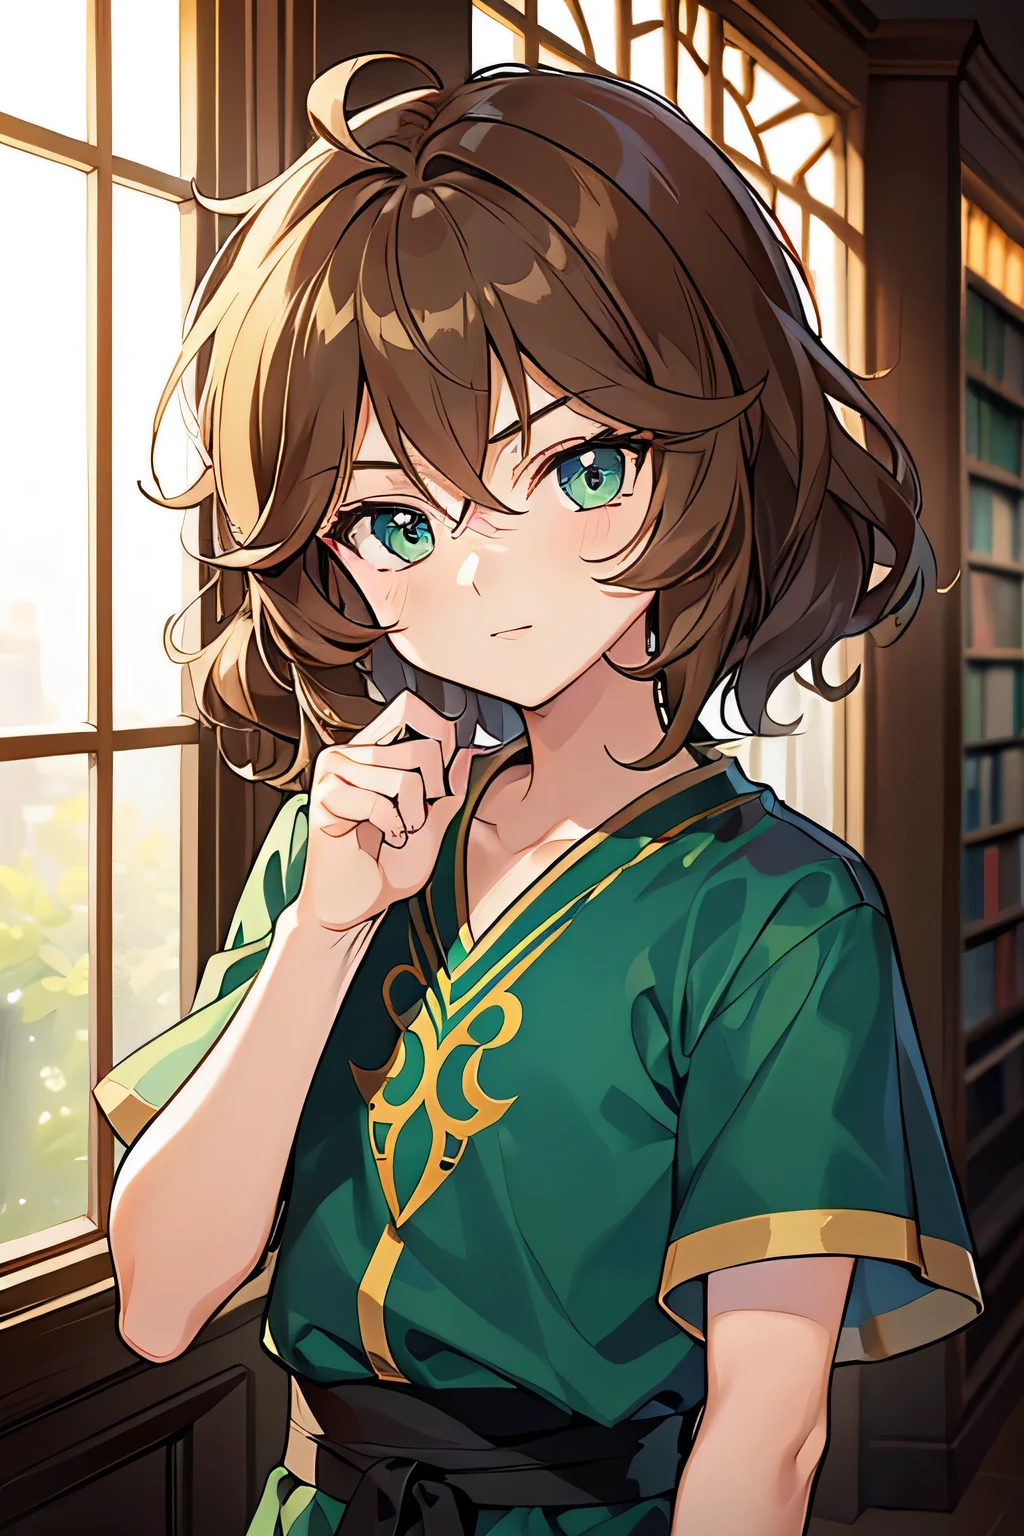 (high quality, gorgeous), (expressive eyes, perfect face) portrait, 1 child, young guy, 14 year old, Alone, preadolescent, young guy, brown hair, green eyes, wavy hair, soft smile, short hair, wavy hair, styled hair, looking at the viewer, ancient arabic clothing, Blue long sleeve shirt, eyes slightly narrowed,  face, adolescent, calm expression, shout similar to Hypnos Saint Seiya. Inside an English library.